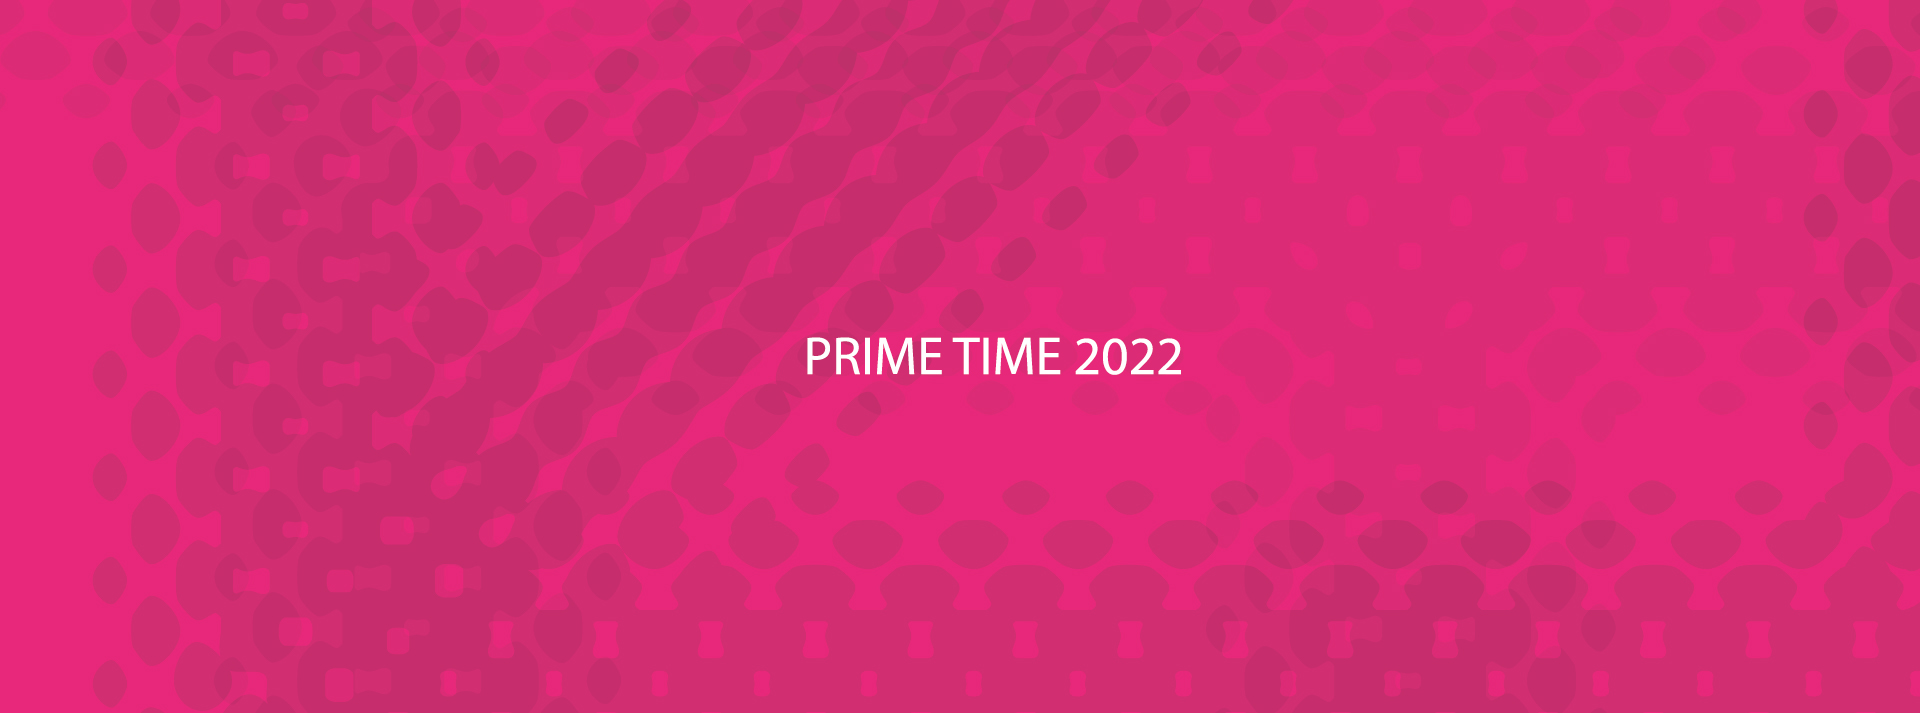 200123 200228 prime time 95ee2